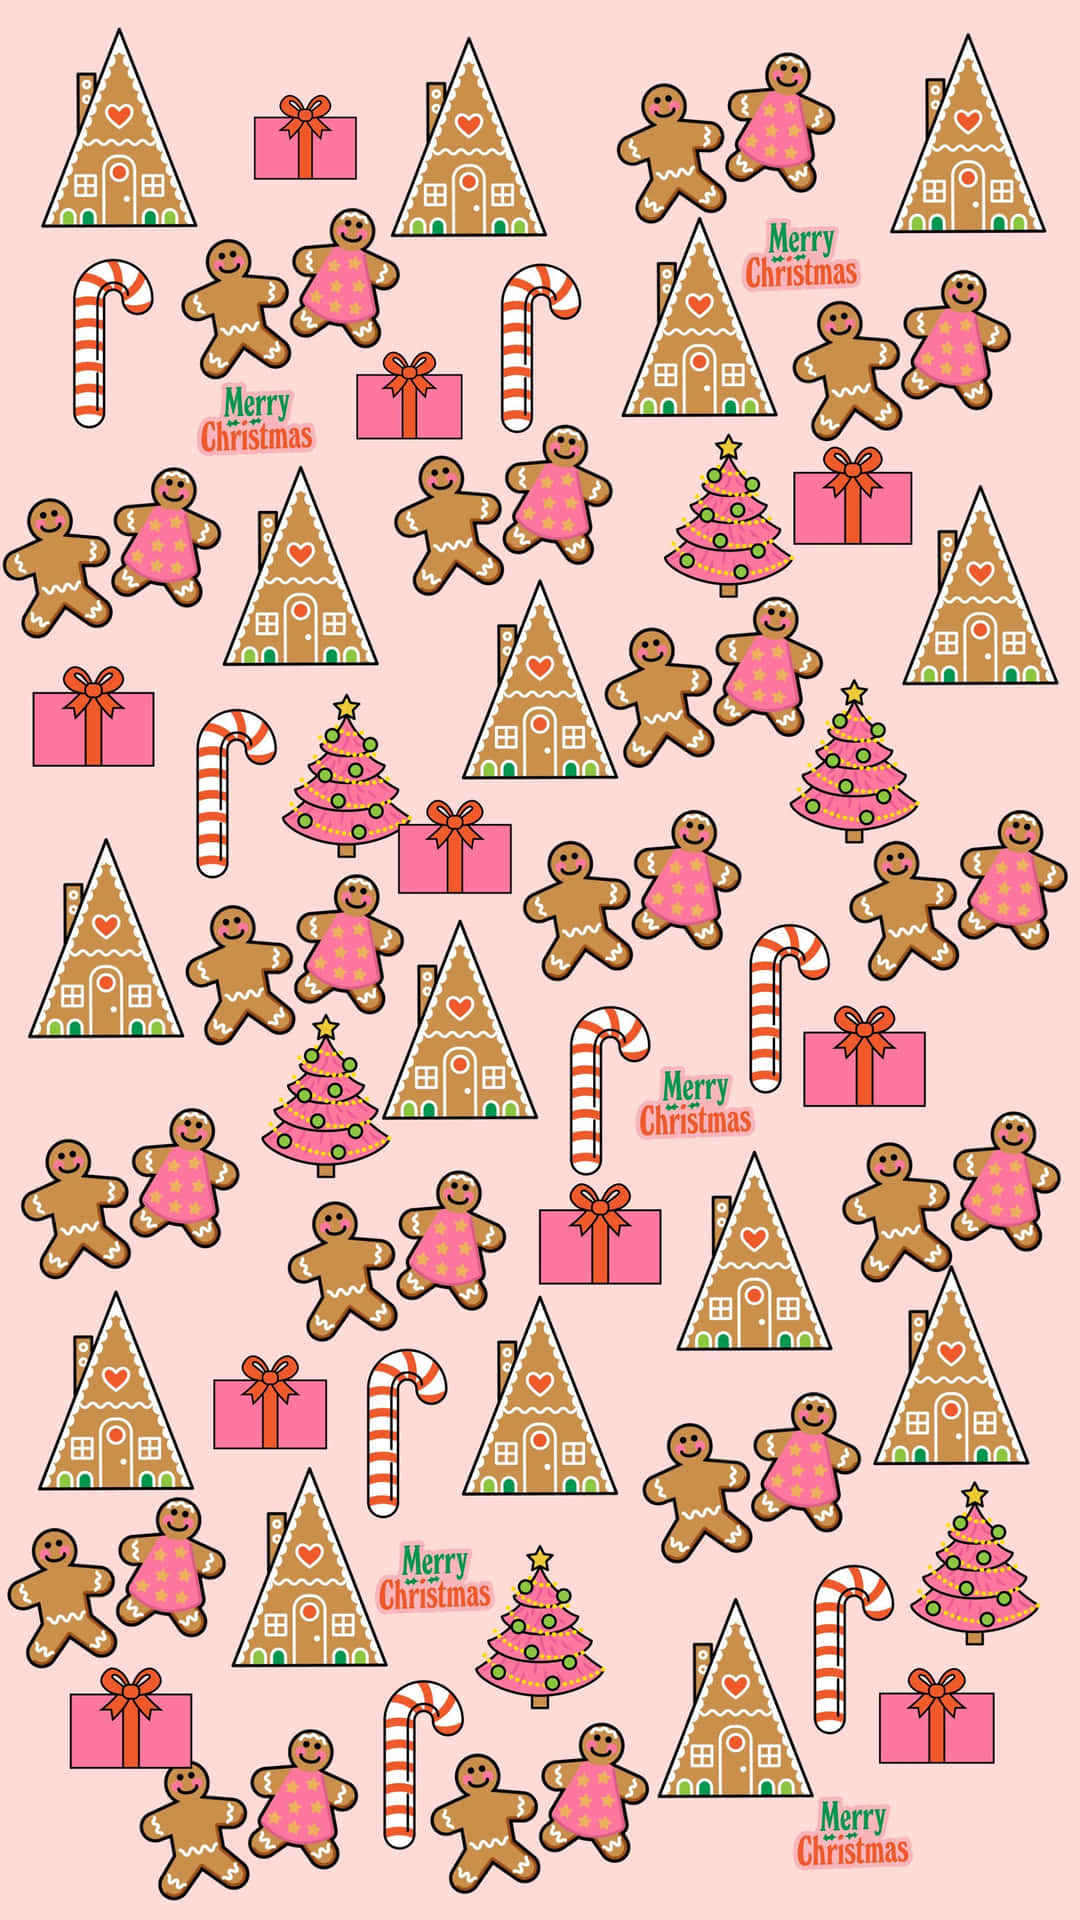 Get into the festive spirit with this cute Christmas phone! Wallpaper